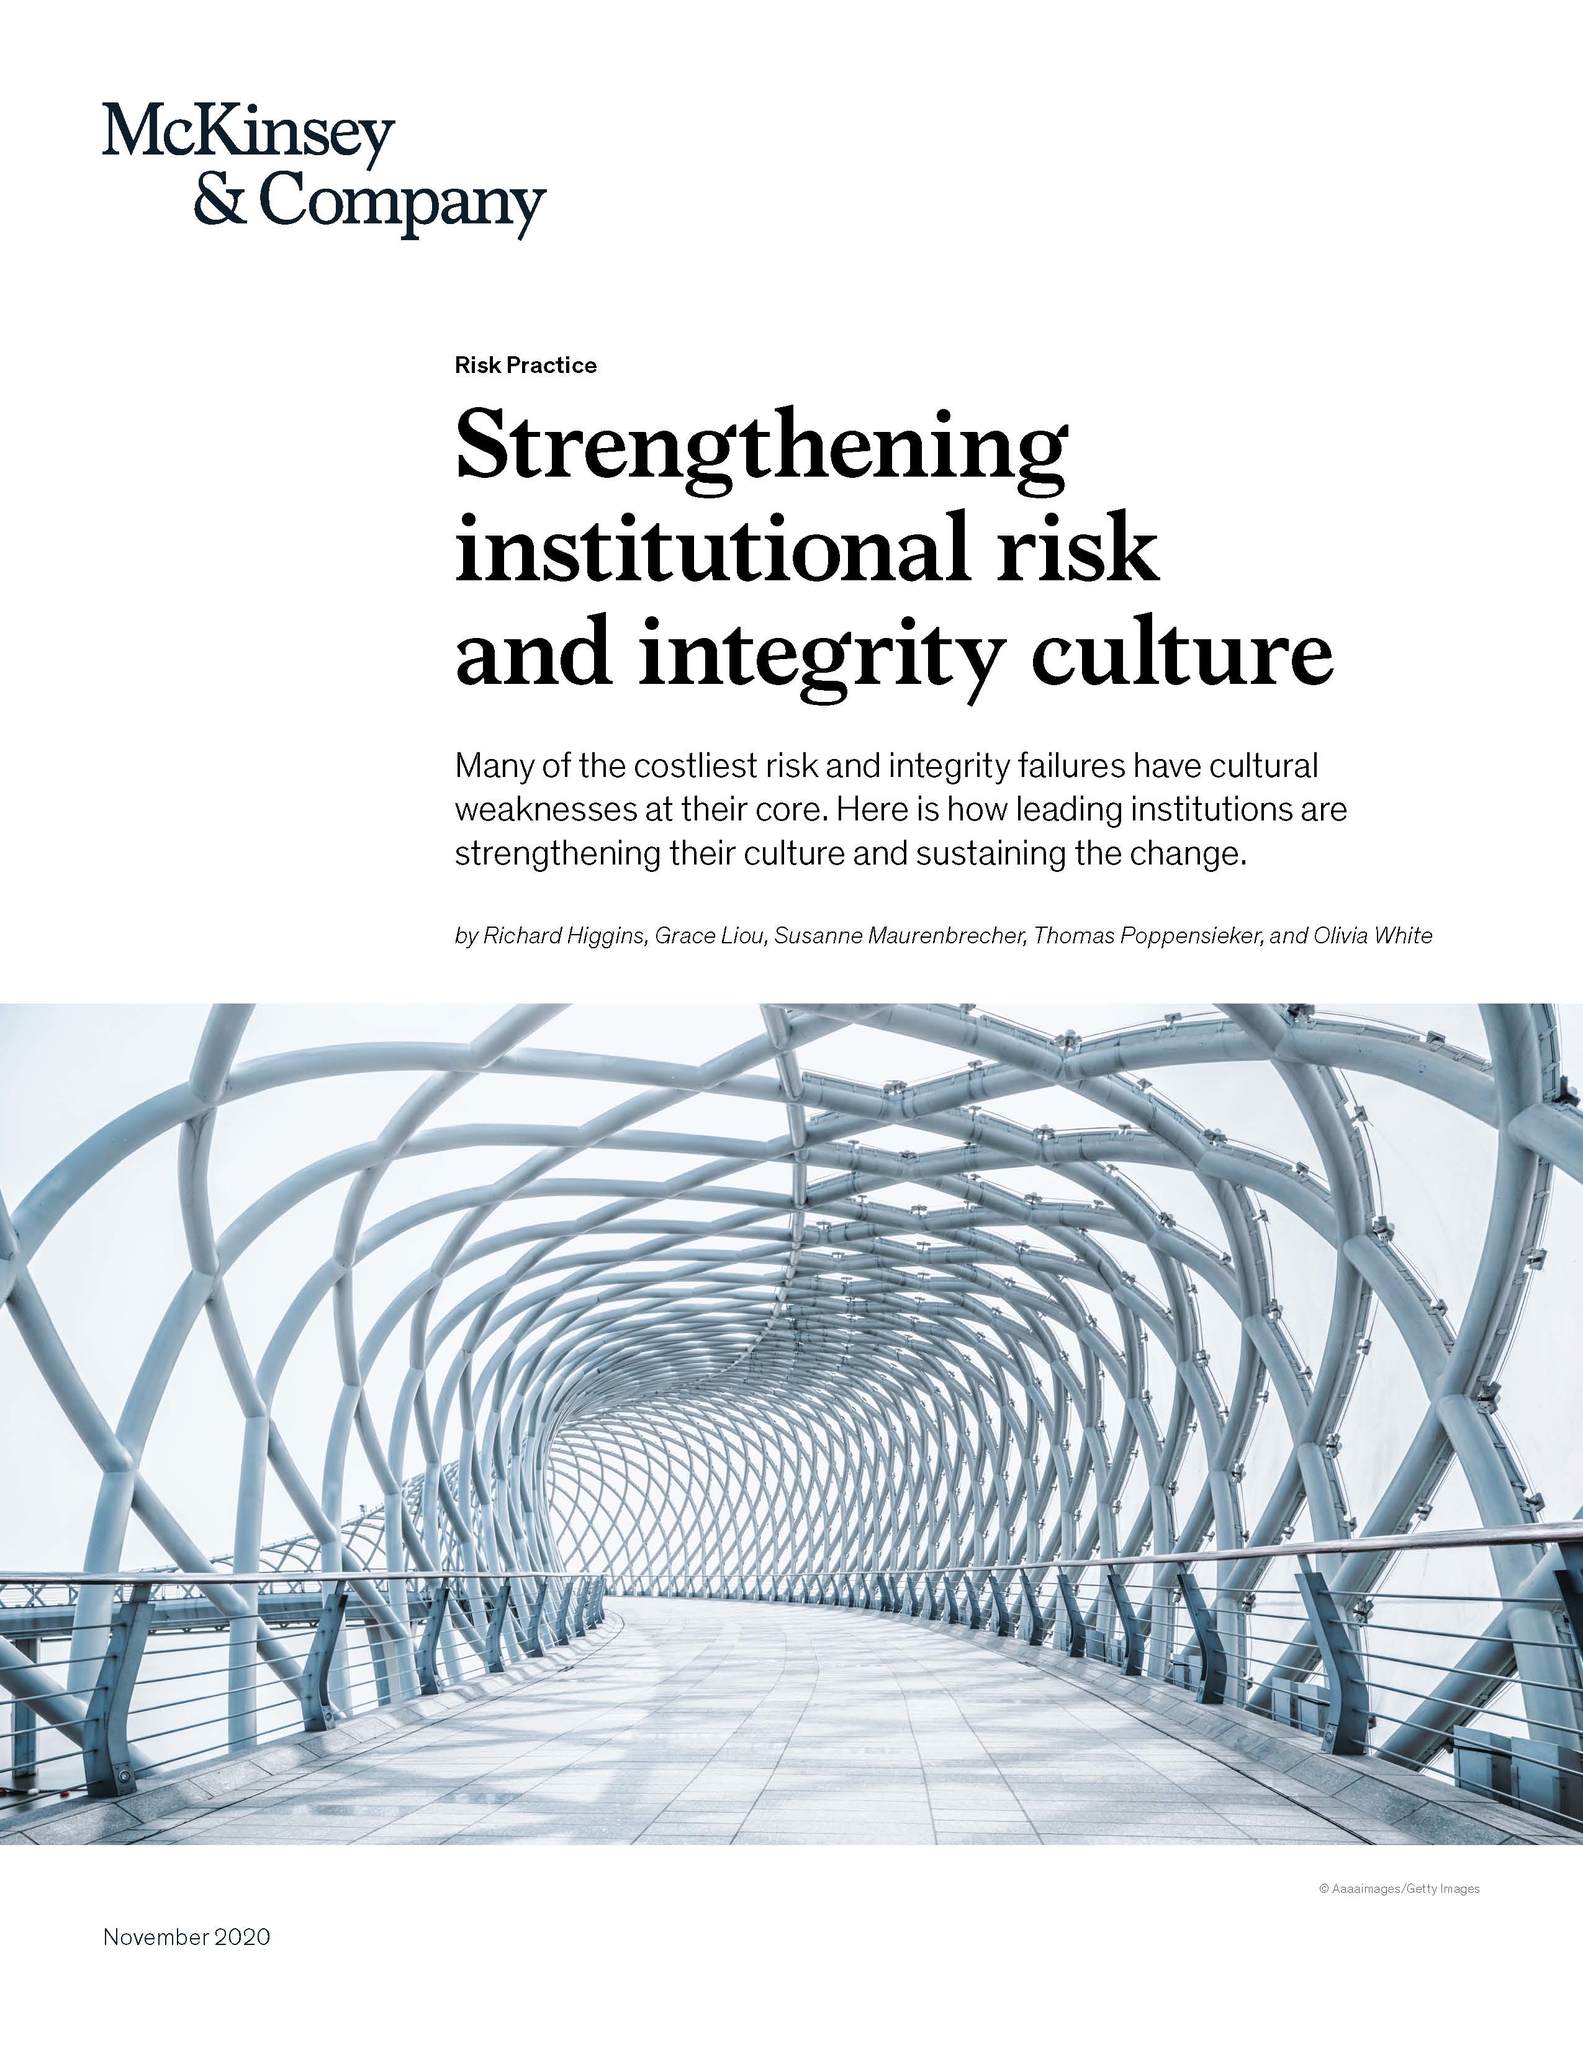 Strengthening institutional risk and integrity culture